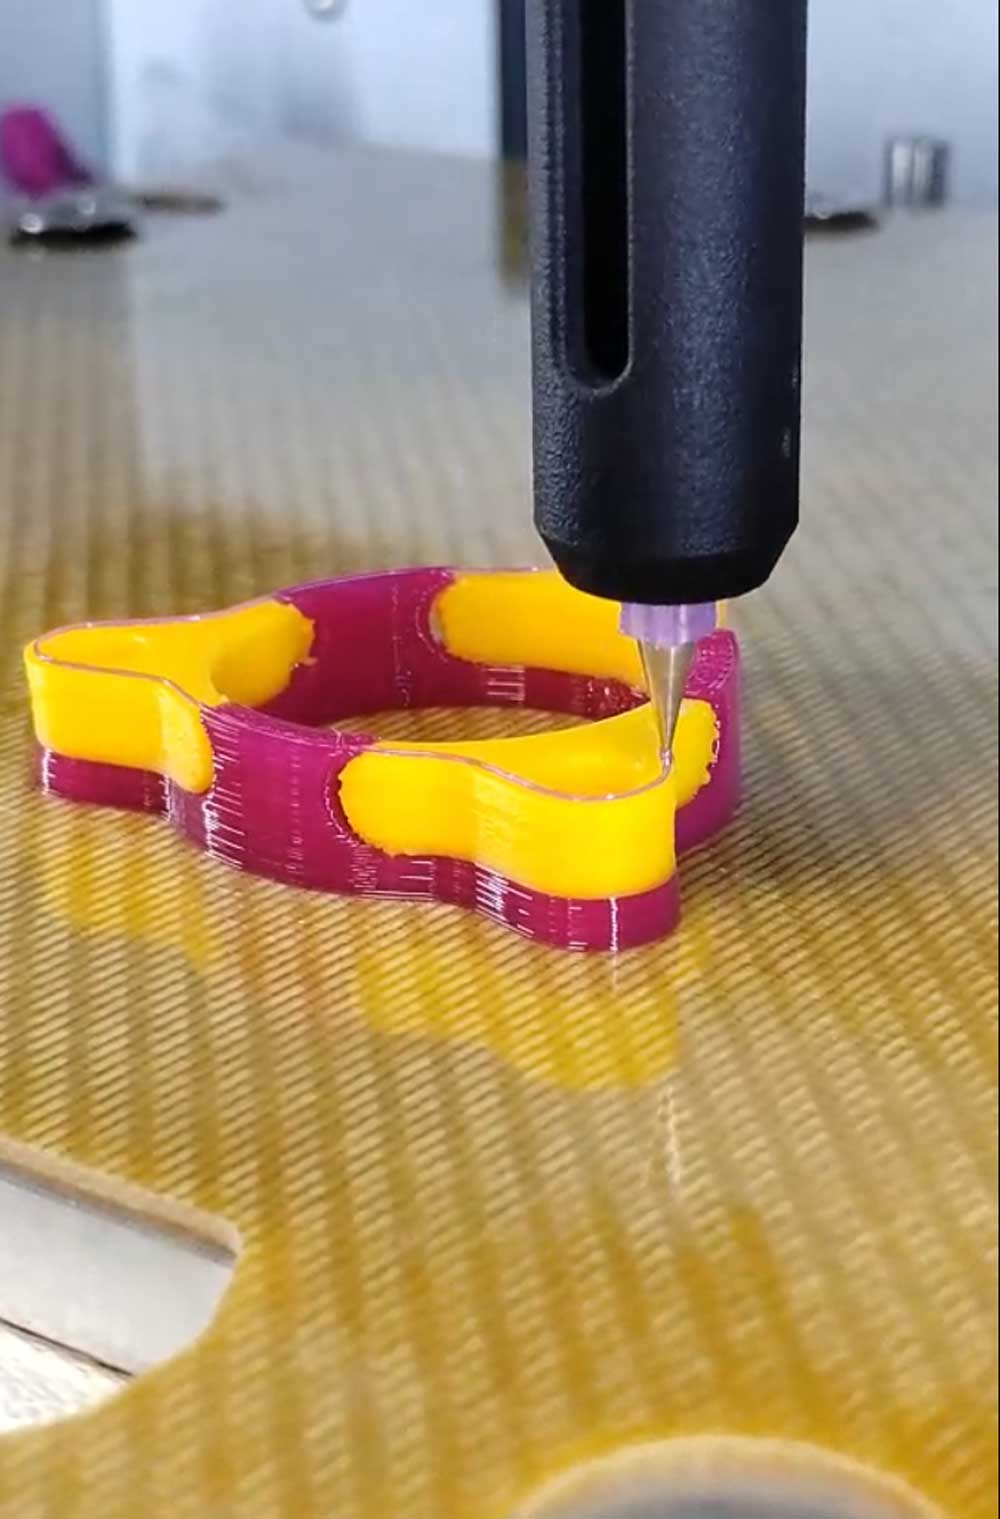 3D Printed Silicone over support material